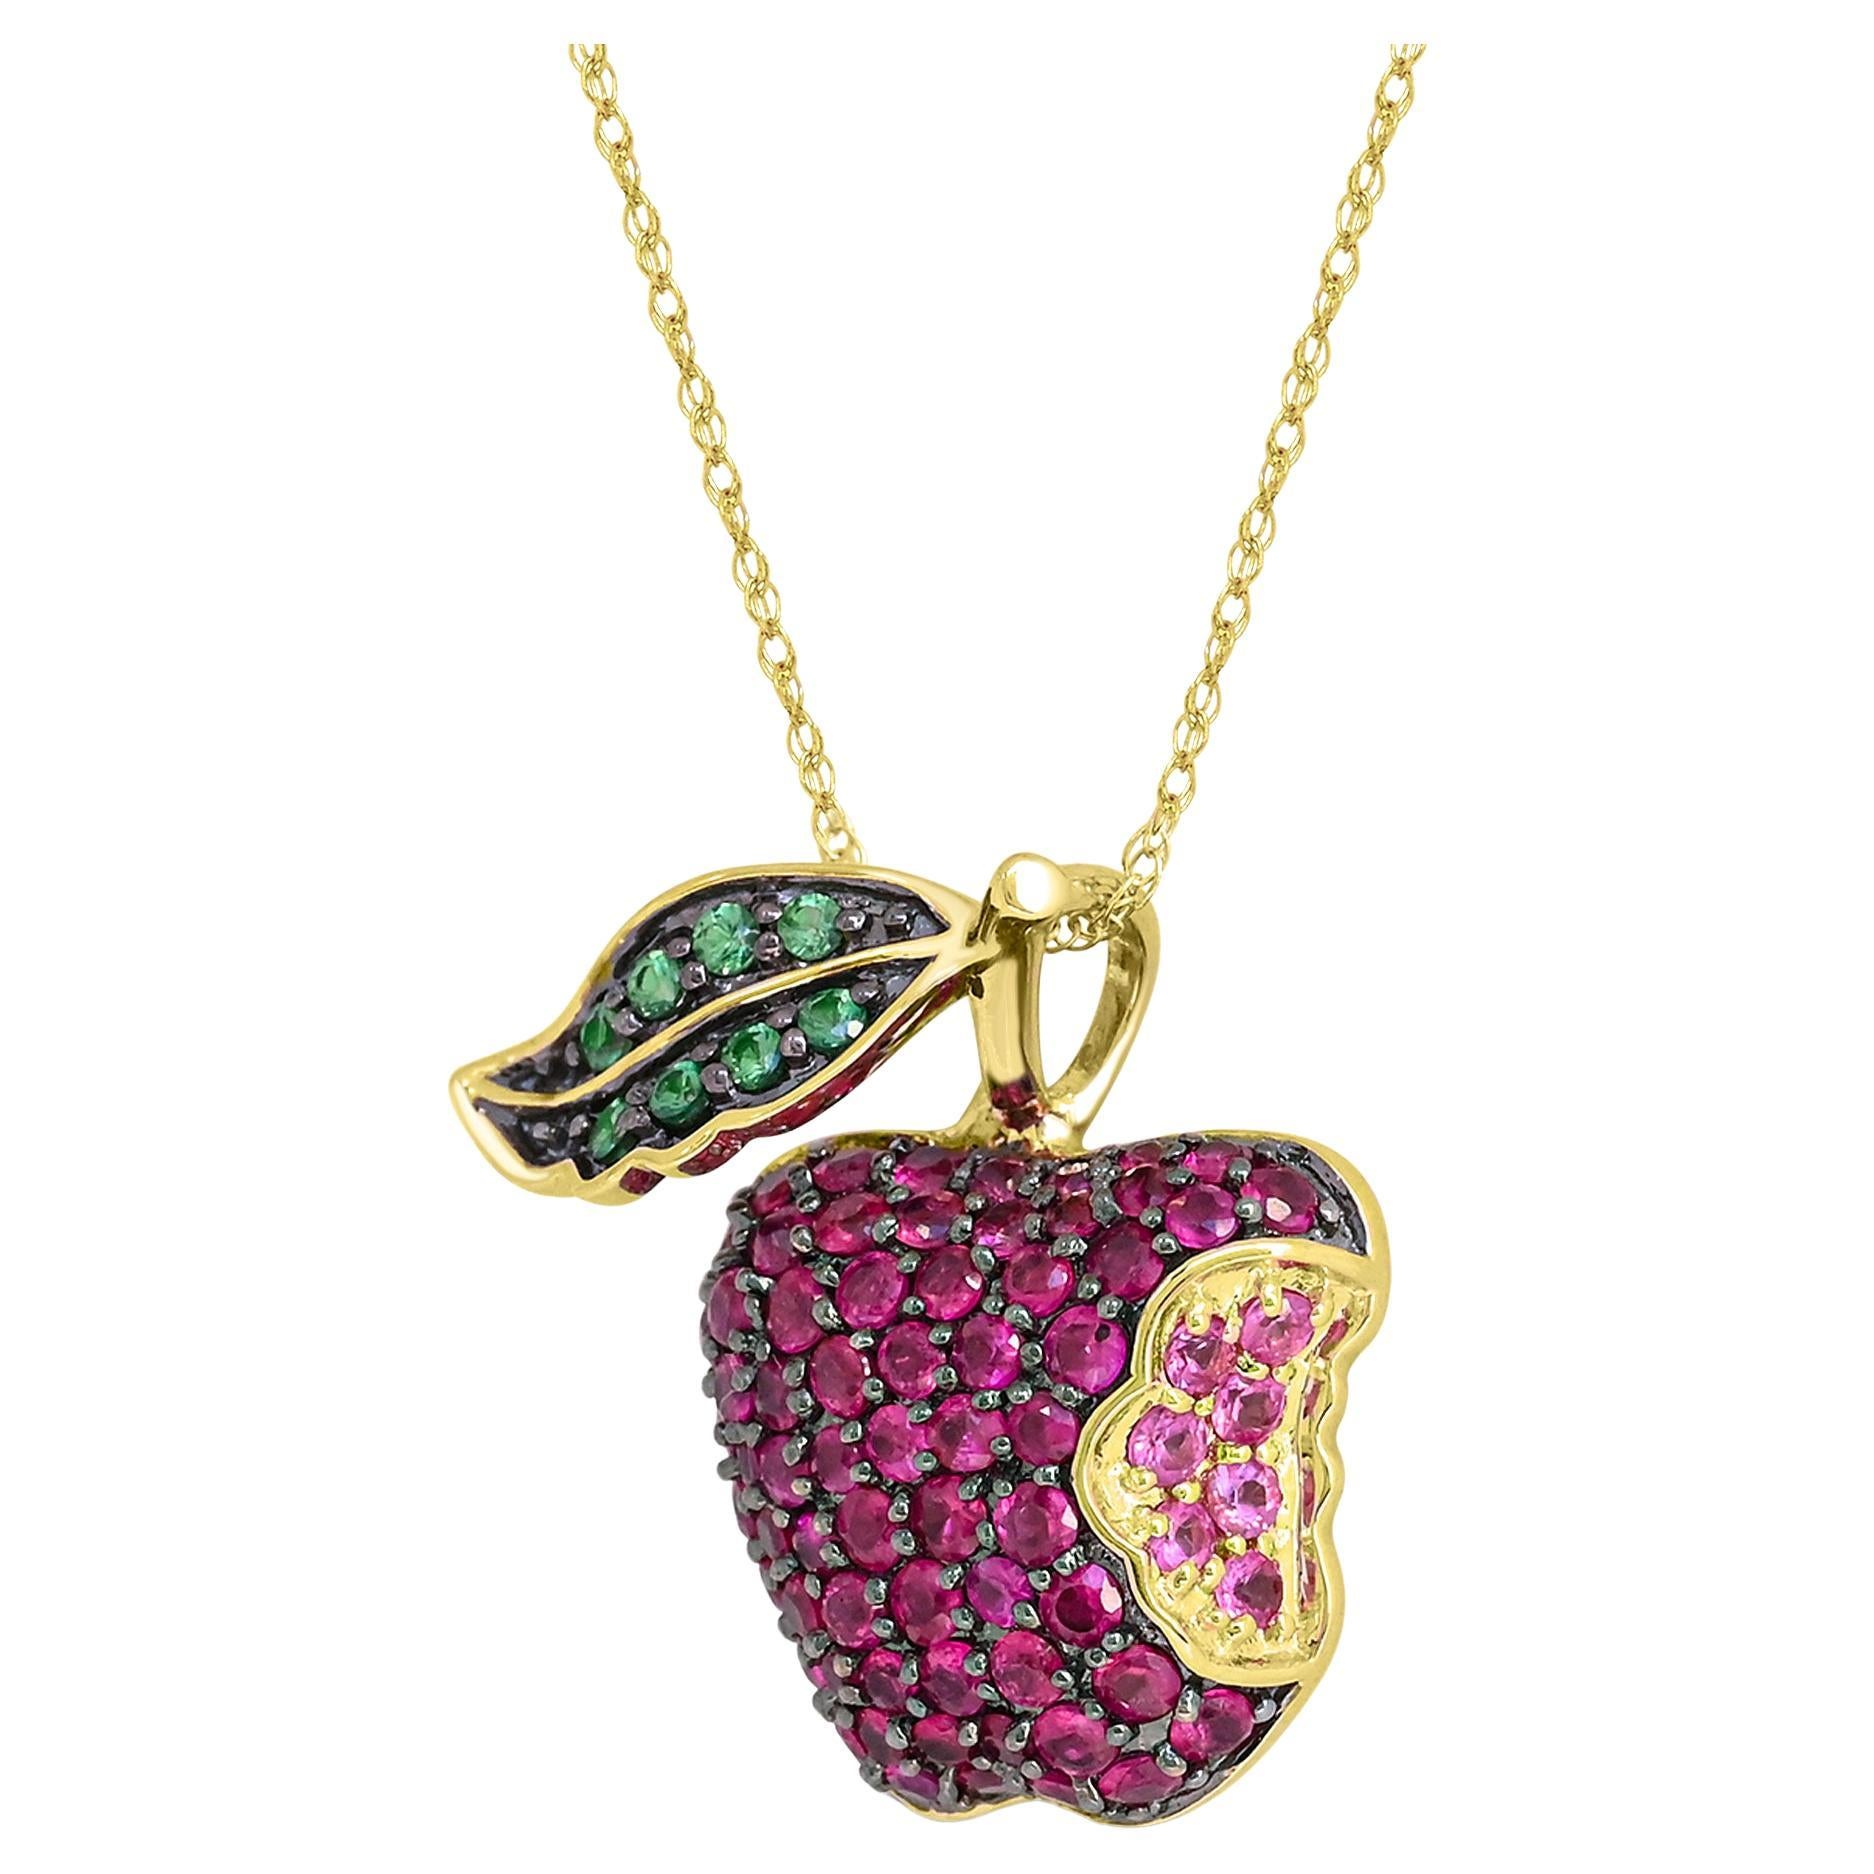 Indulge in the adorable beauty of our Ruby, Tsavorite and Pink Sapphire Apple Pendant Necklace in 14K Yellow Gold. This exquisite piece features cluster setting of round-cut rubies accented by pink sapphire and tsavorite gemstones, delicately set in